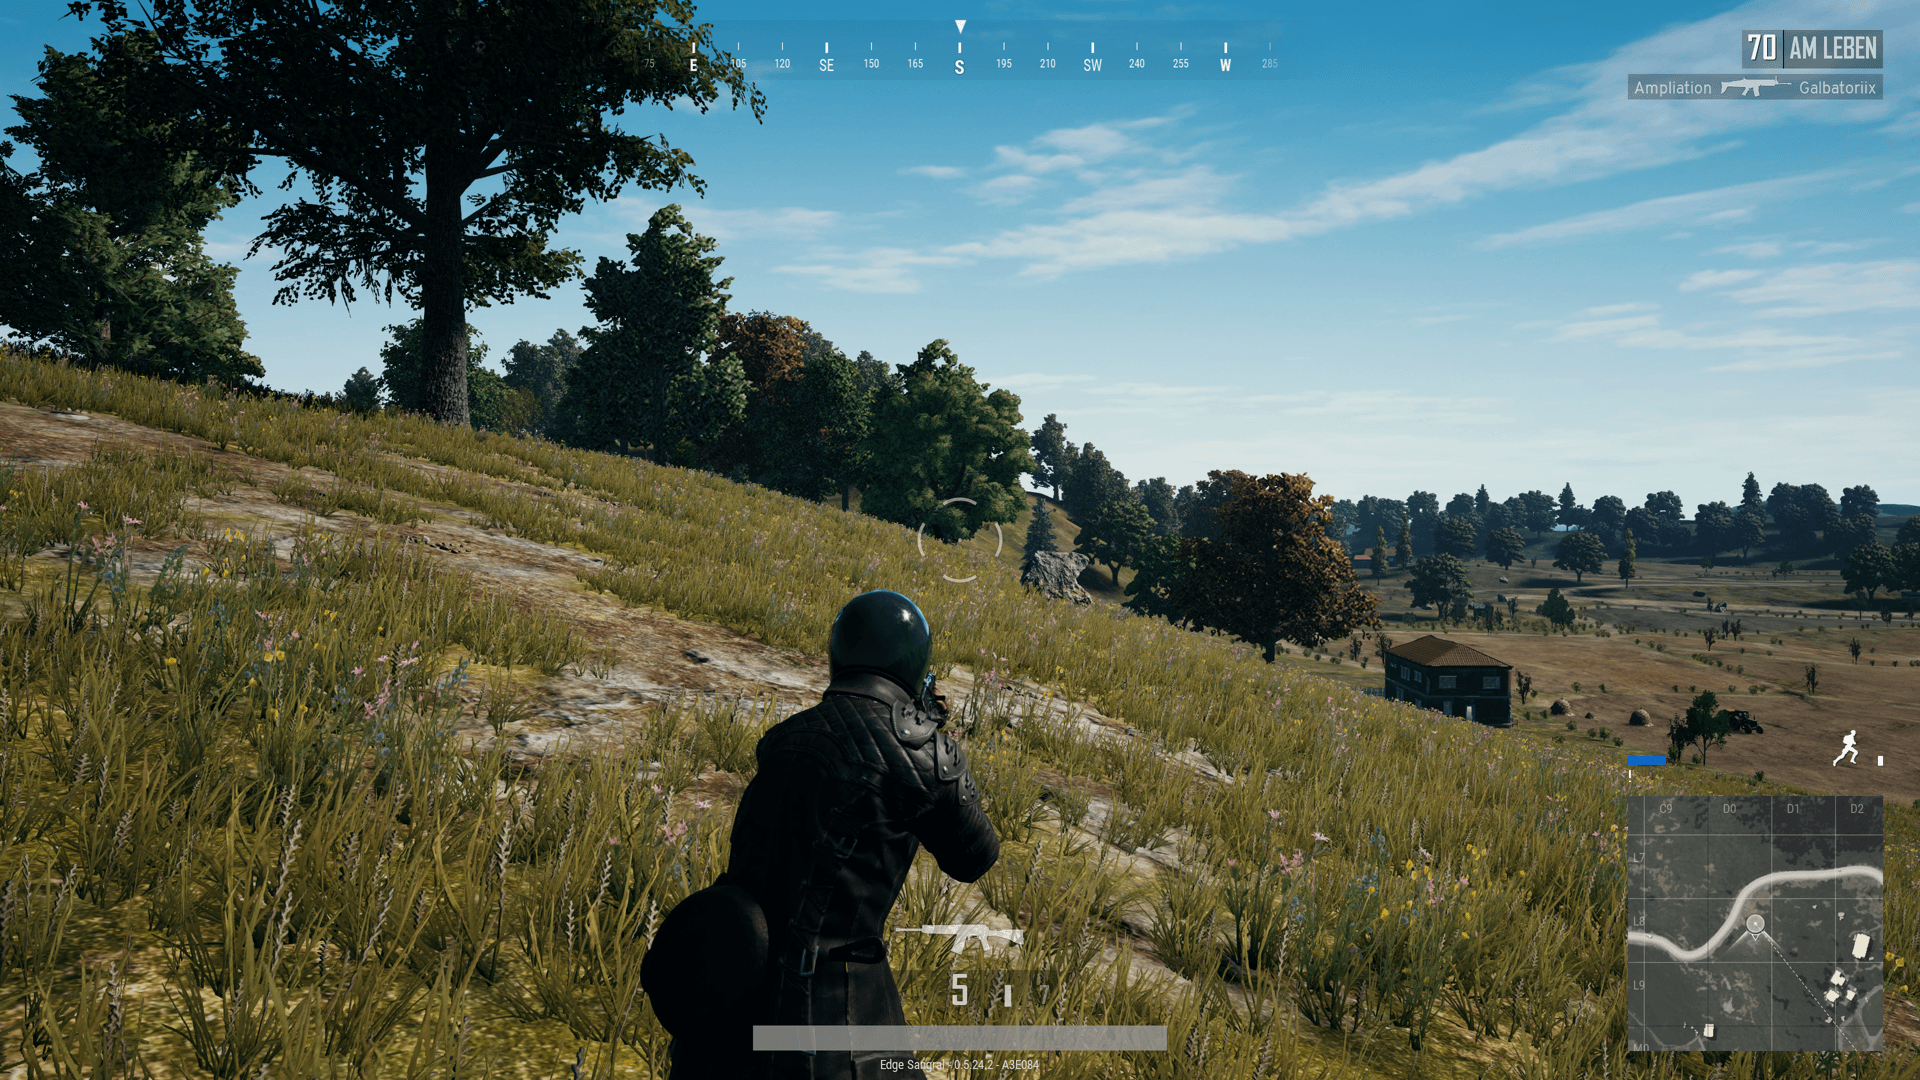 PLAYERUNKNOWN: PUBG on Xbox One Is A Little Rough, But We'll